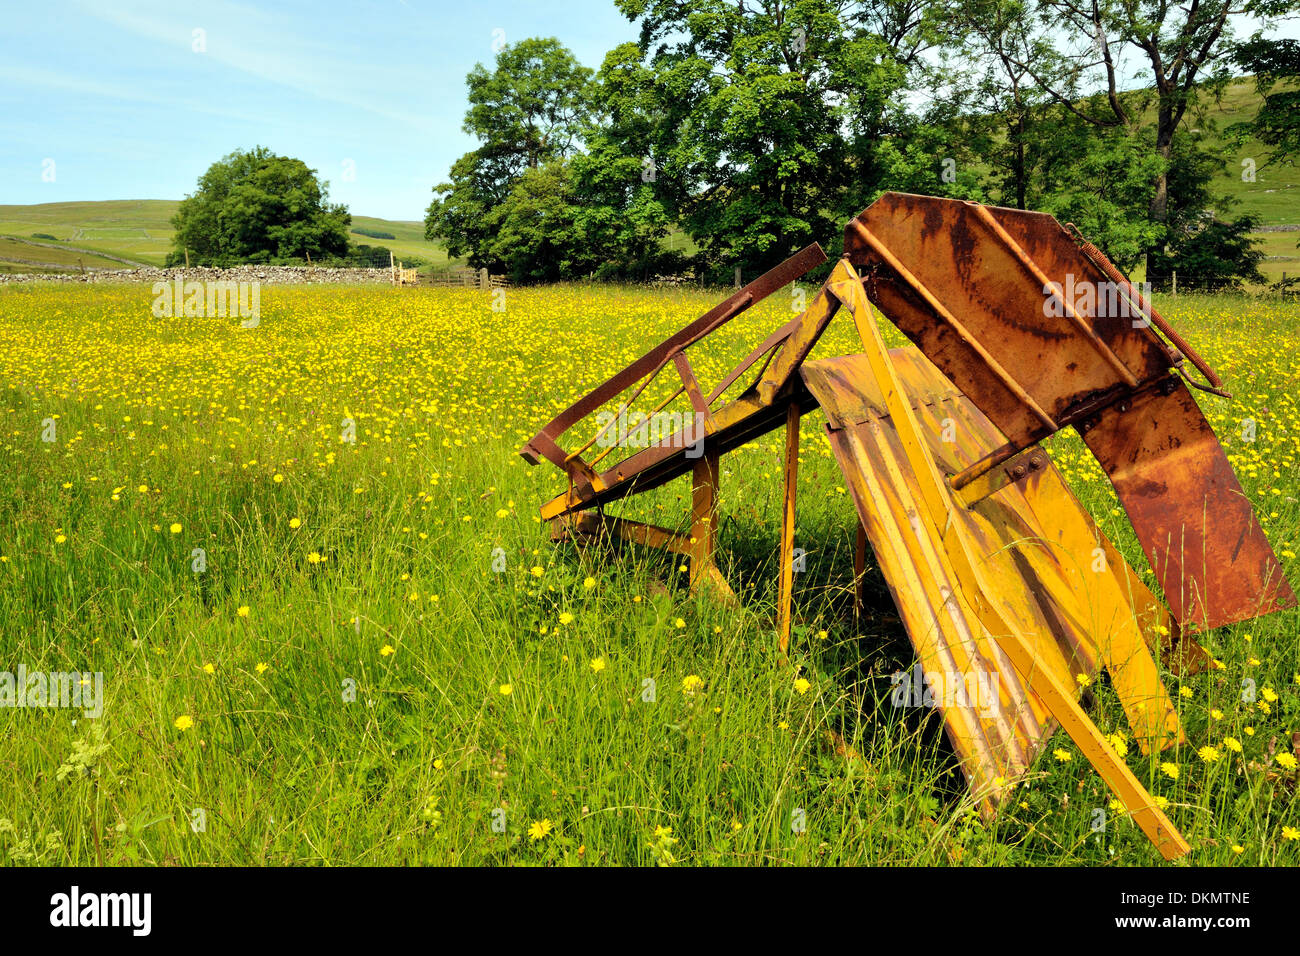 An abandoned and rusting hay making tool in a field of Arnica, Halton Gill, Littondale, Yorkshire Dales National Park, England Stock Photo